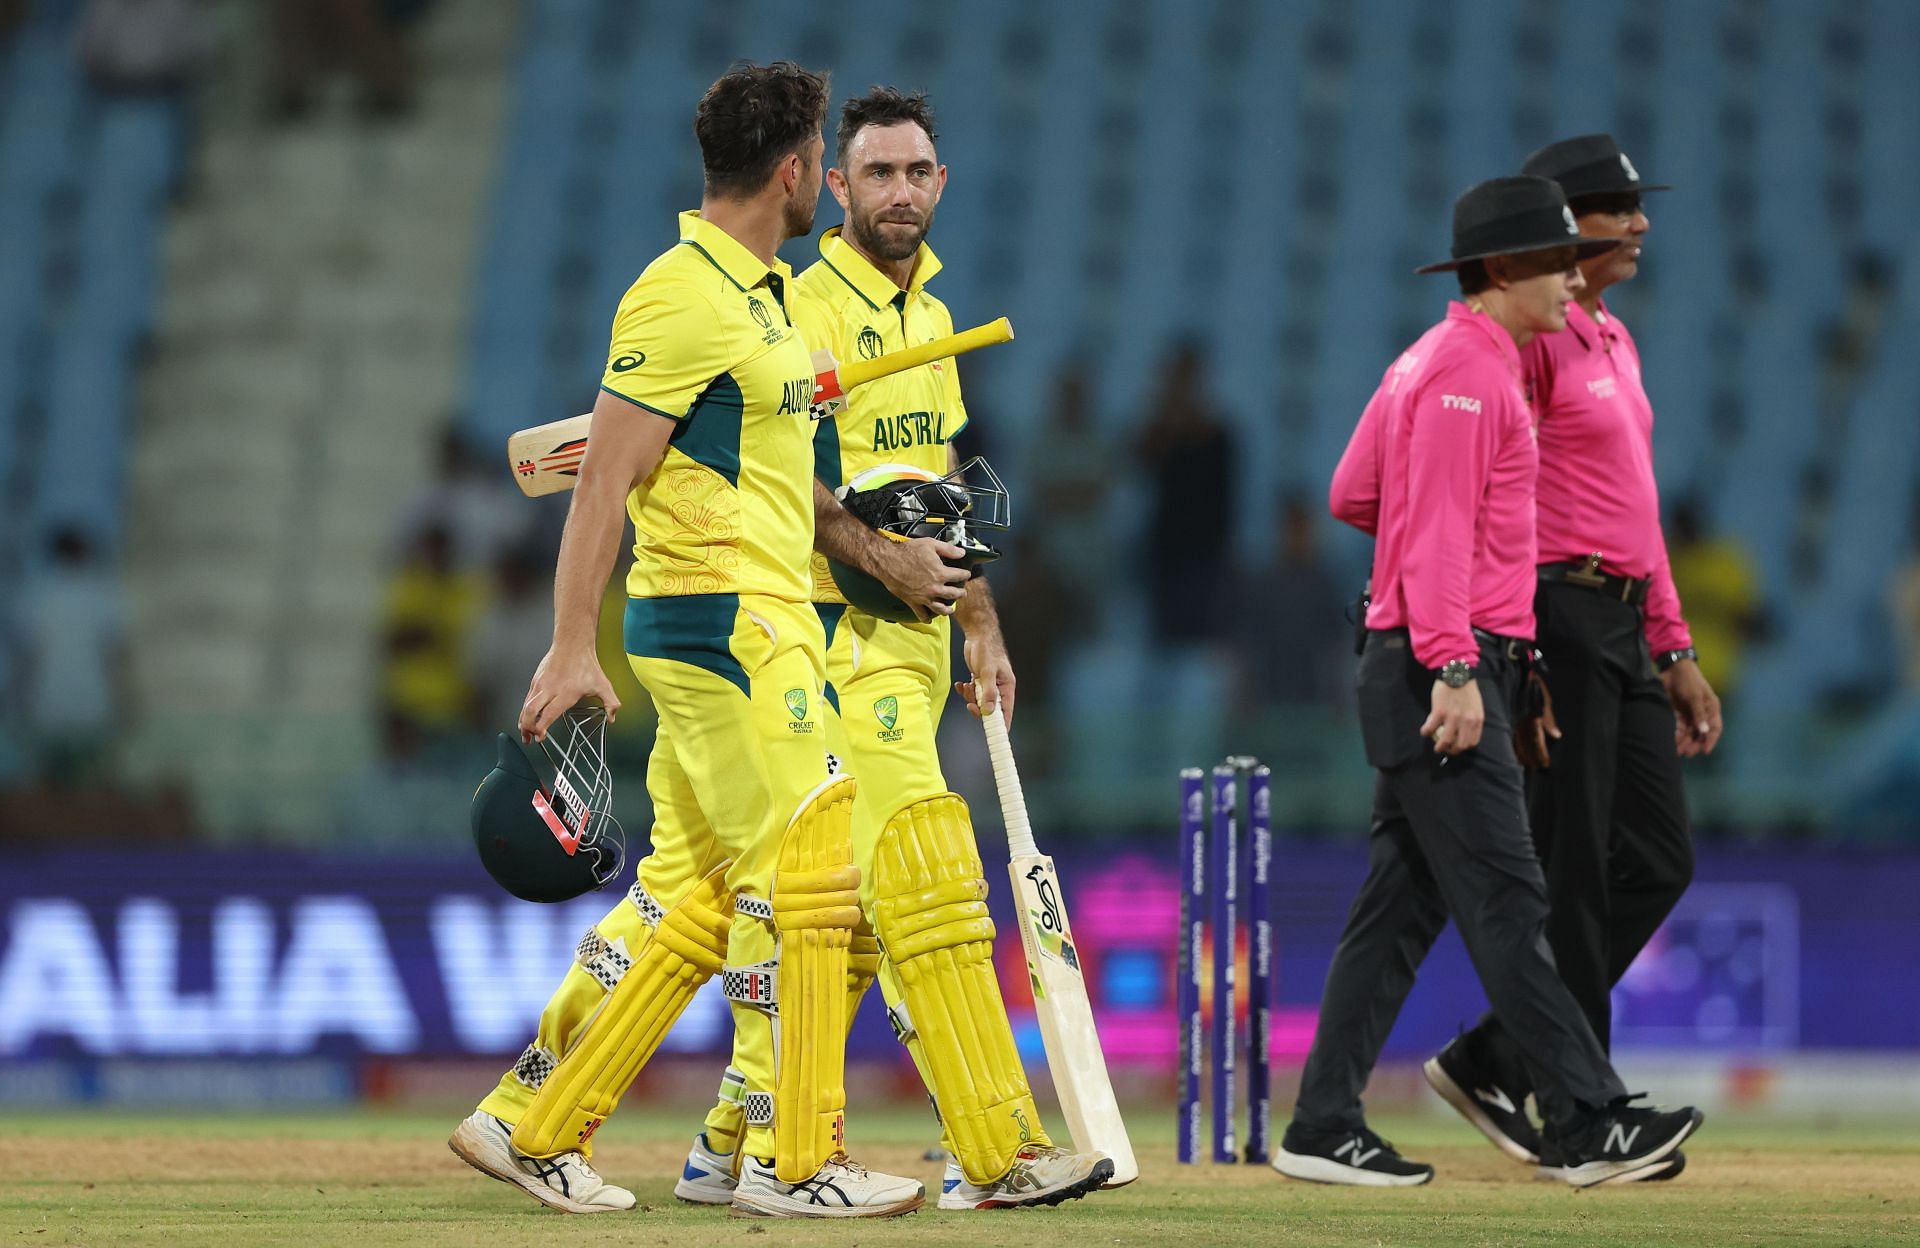 Glenn Maxwell and Marcus Stoinis after beating Sri Lanka in Lucknow [Getty Images]